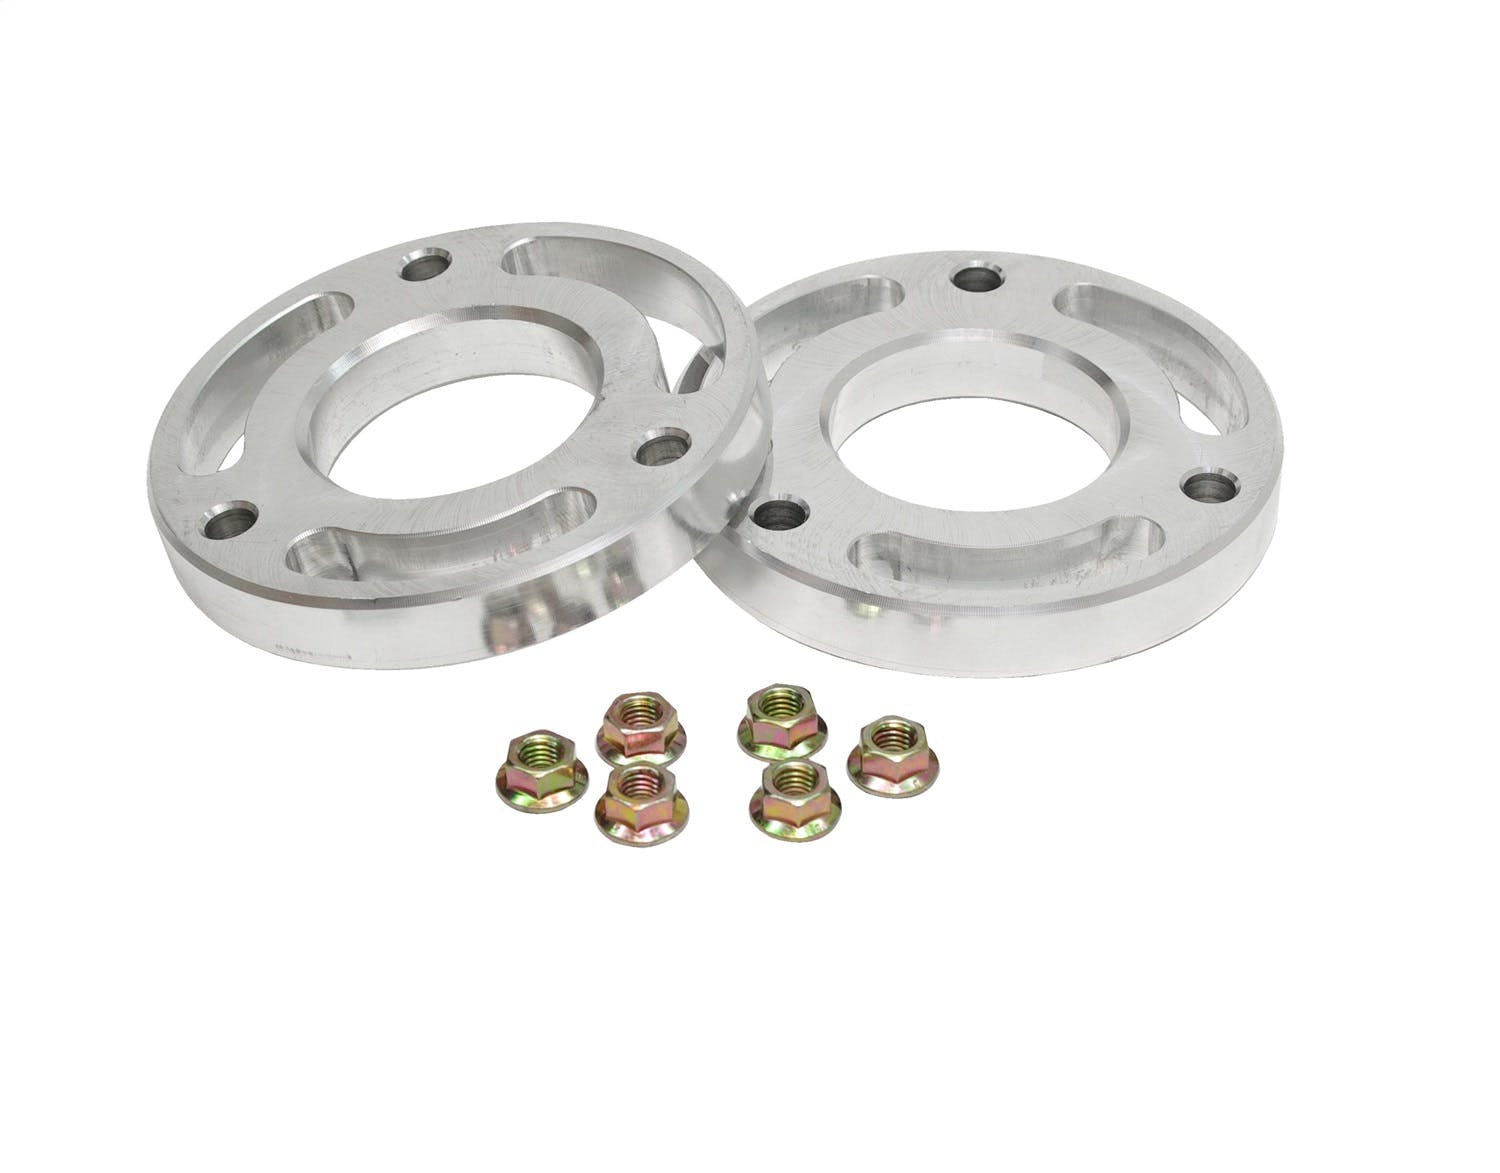 ReadyLIFT 66-39150 1.5" Front Lower Strut Spacer